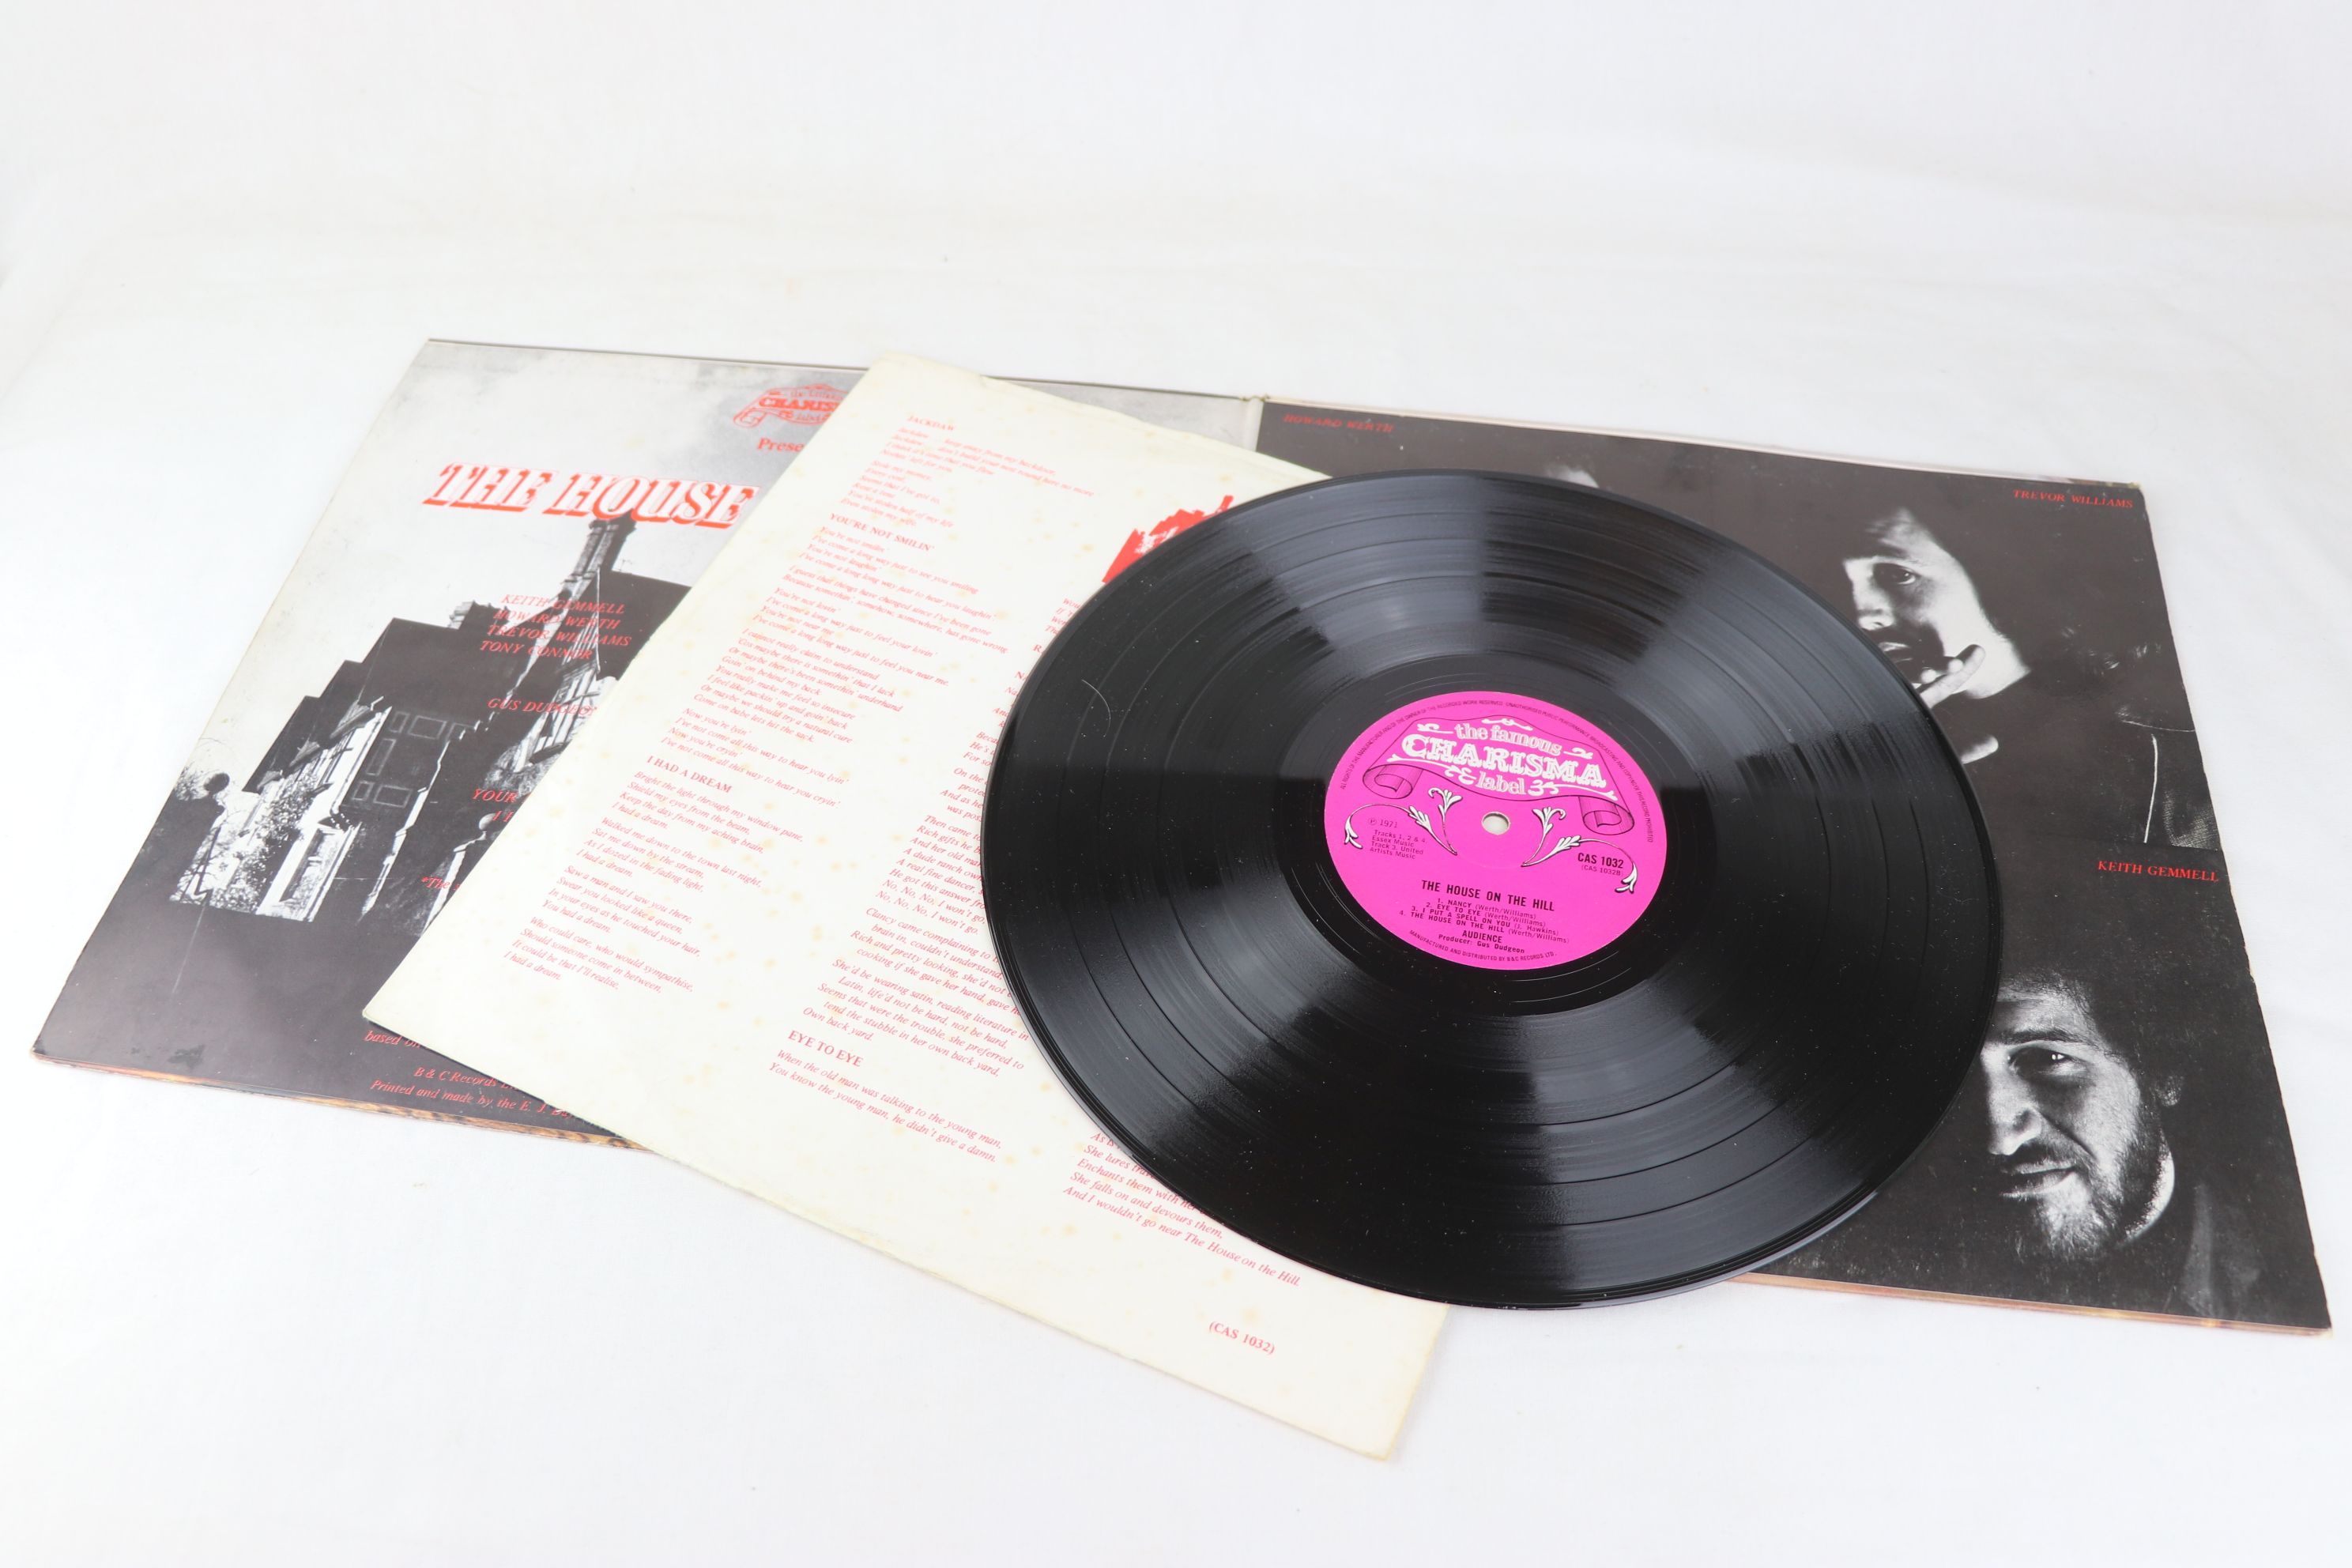 Vinyl - Audience The House On The Hill (CAS 1032) Charisma pink scroll label, lyric inner. - Image 3 of 5